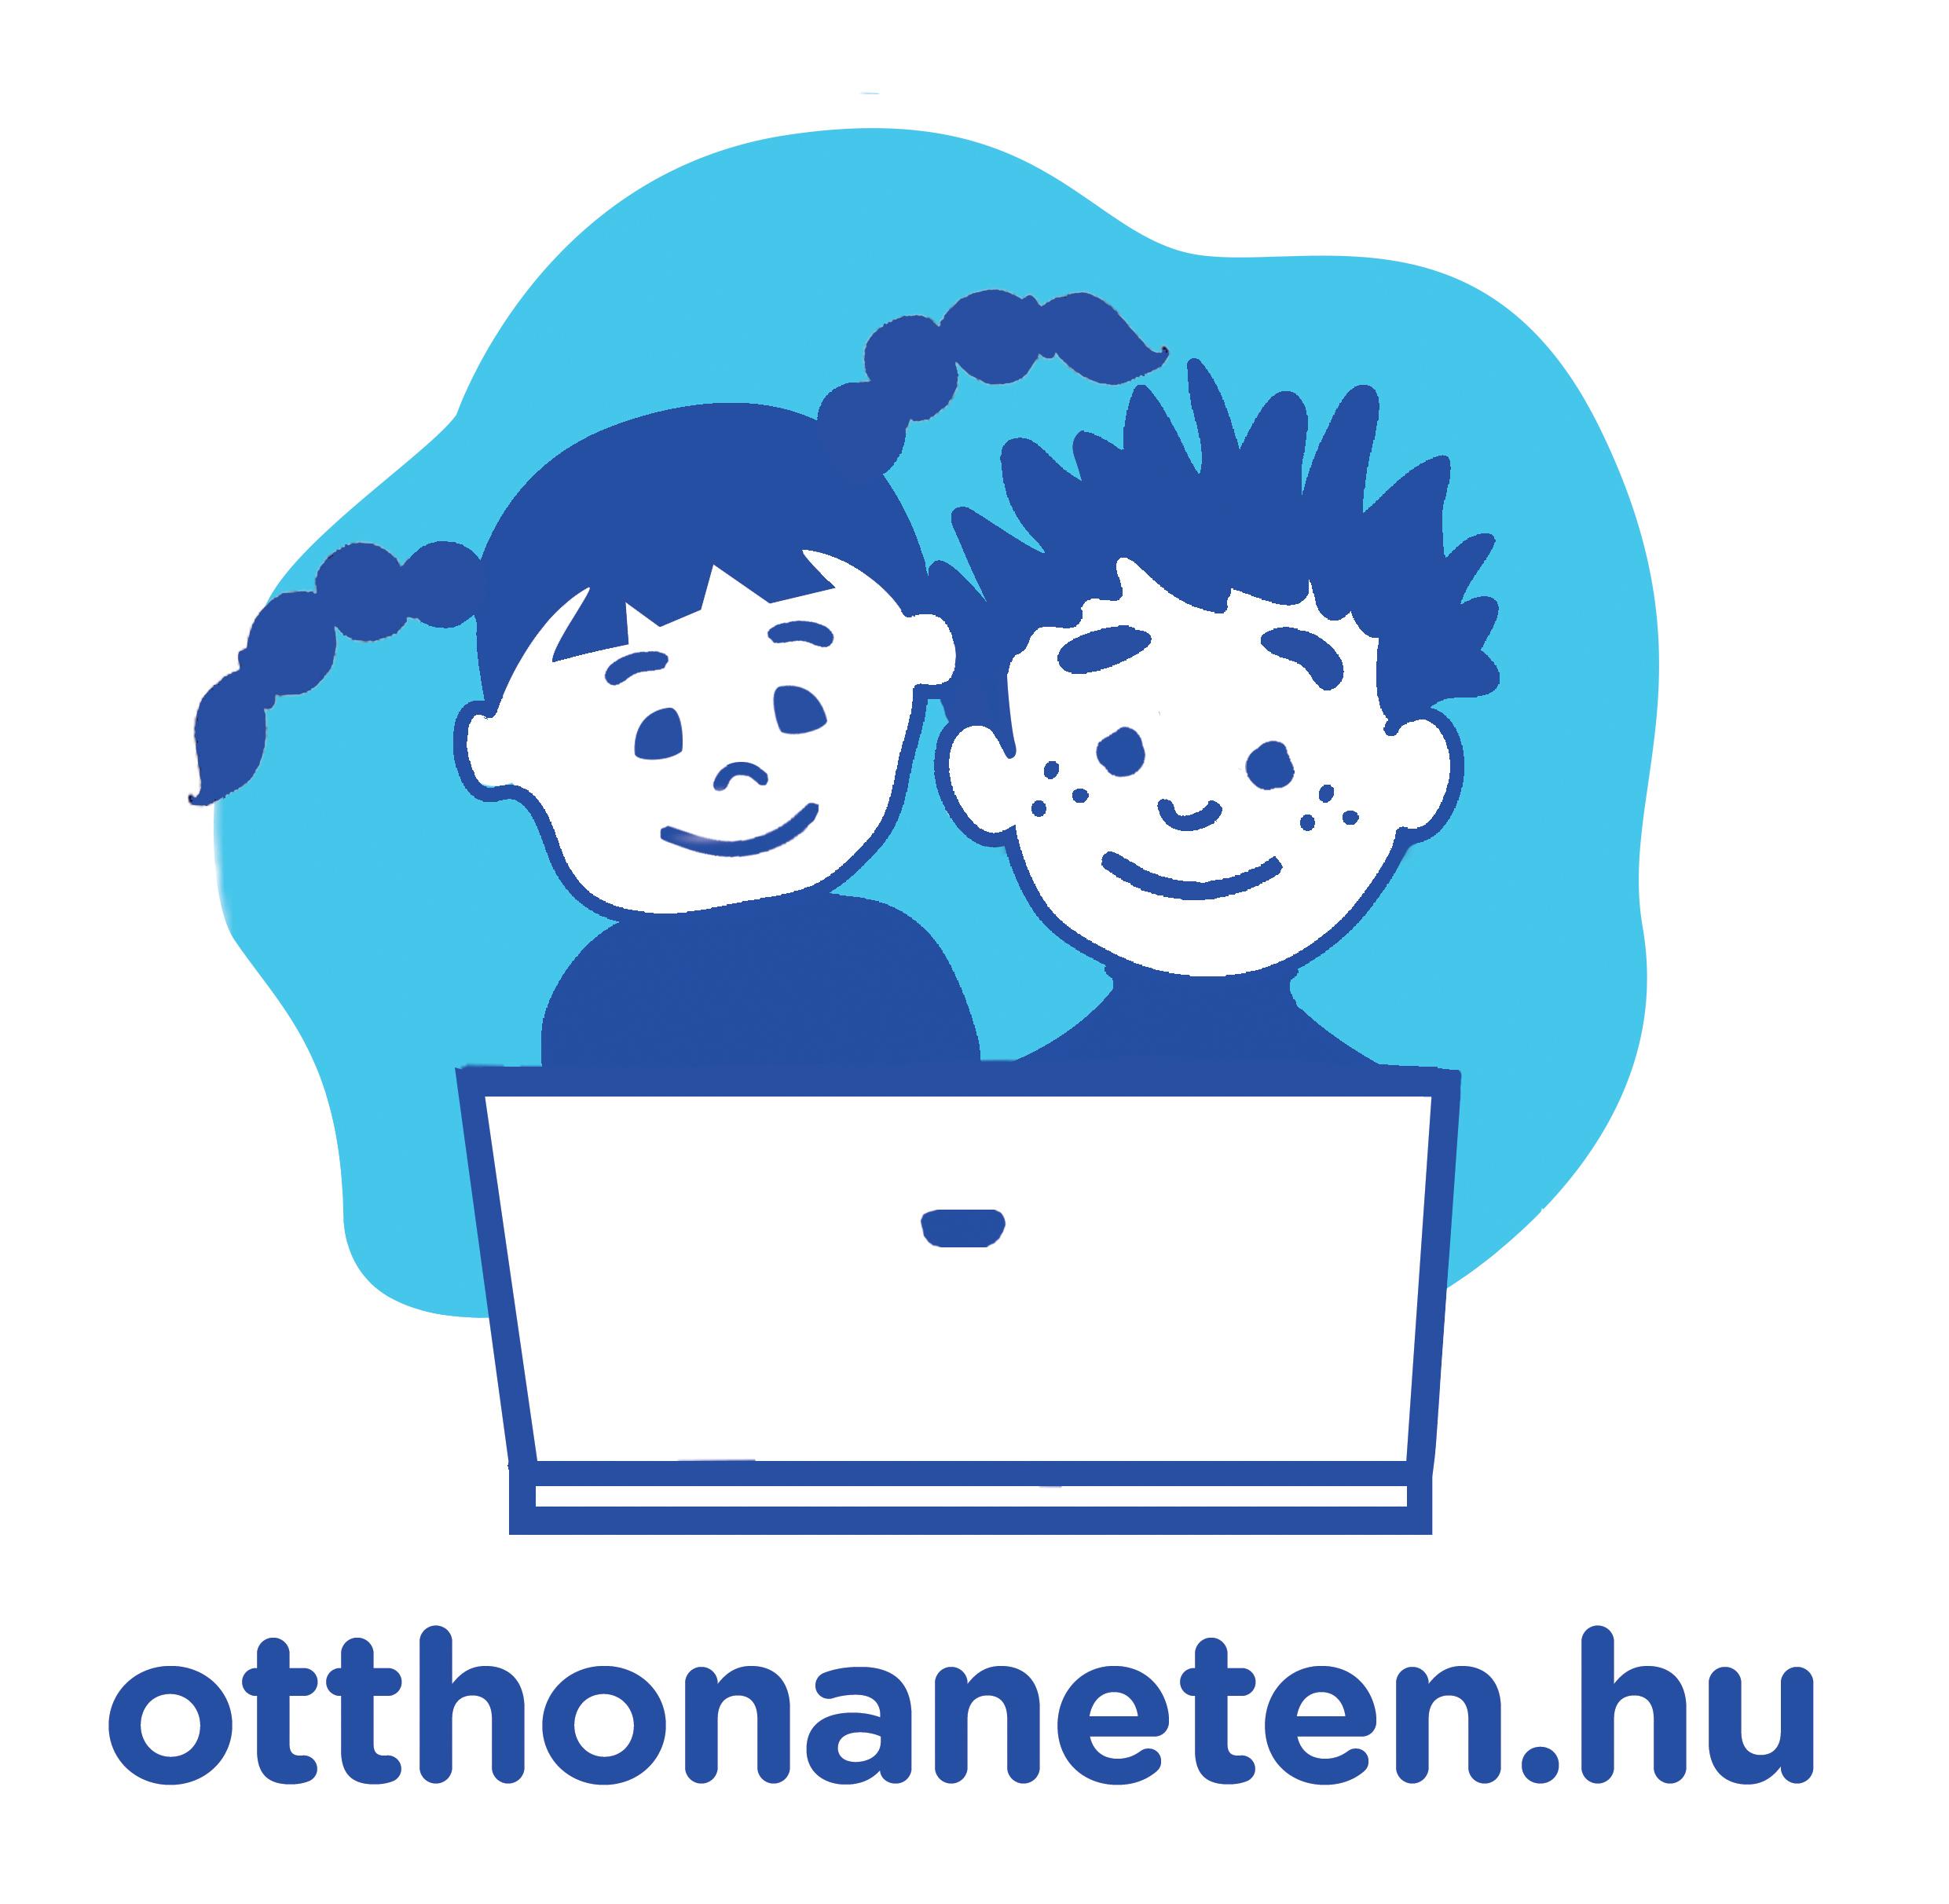 New Website Will Be Launched In Hungary To Help Children’s Safe Web Browsing